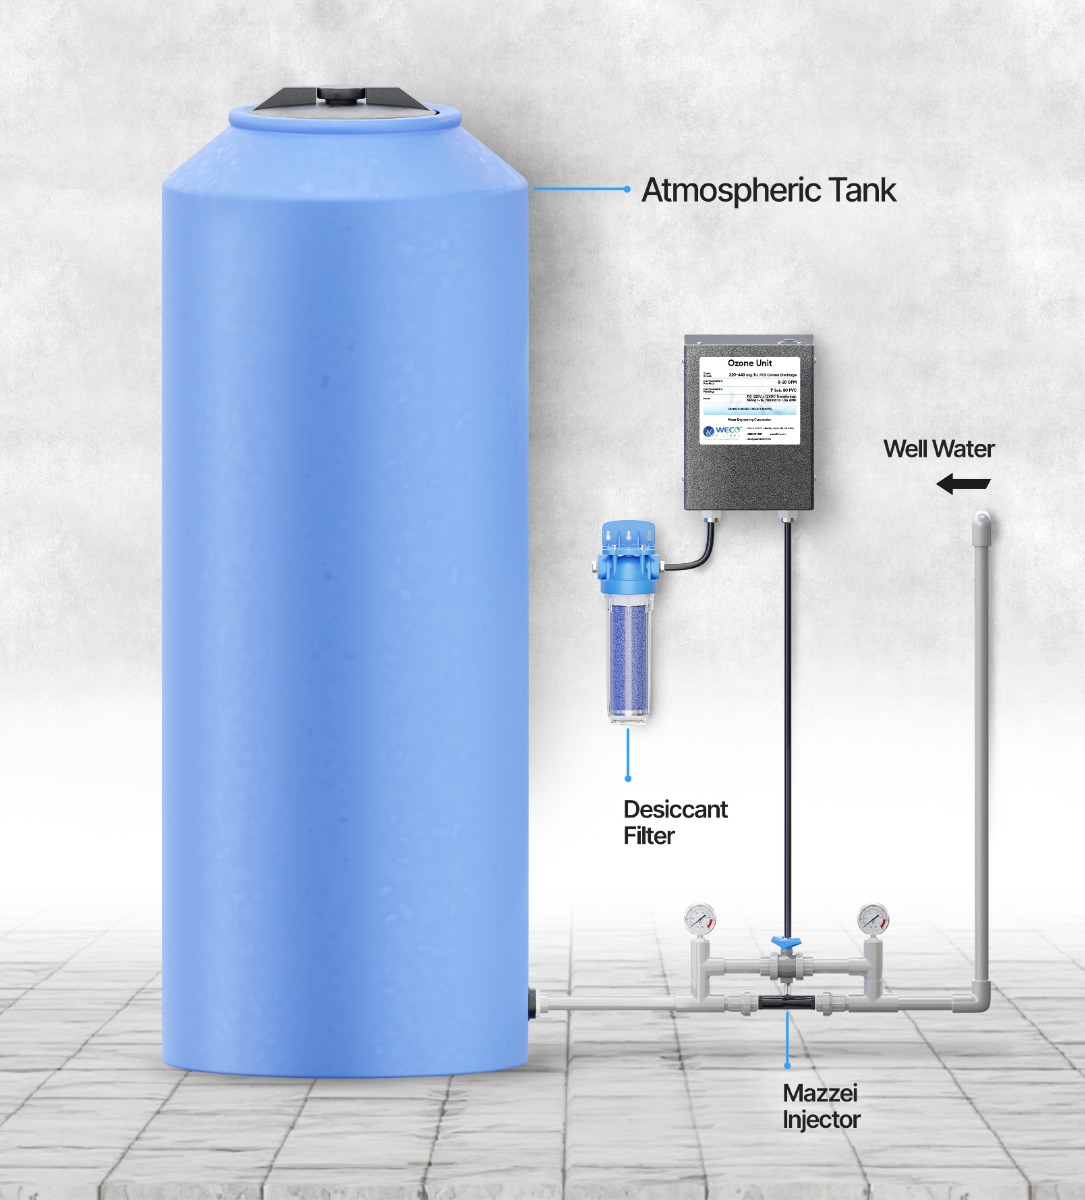 Atmospheric tank ozone generator installation direct after well pump and spin down filter